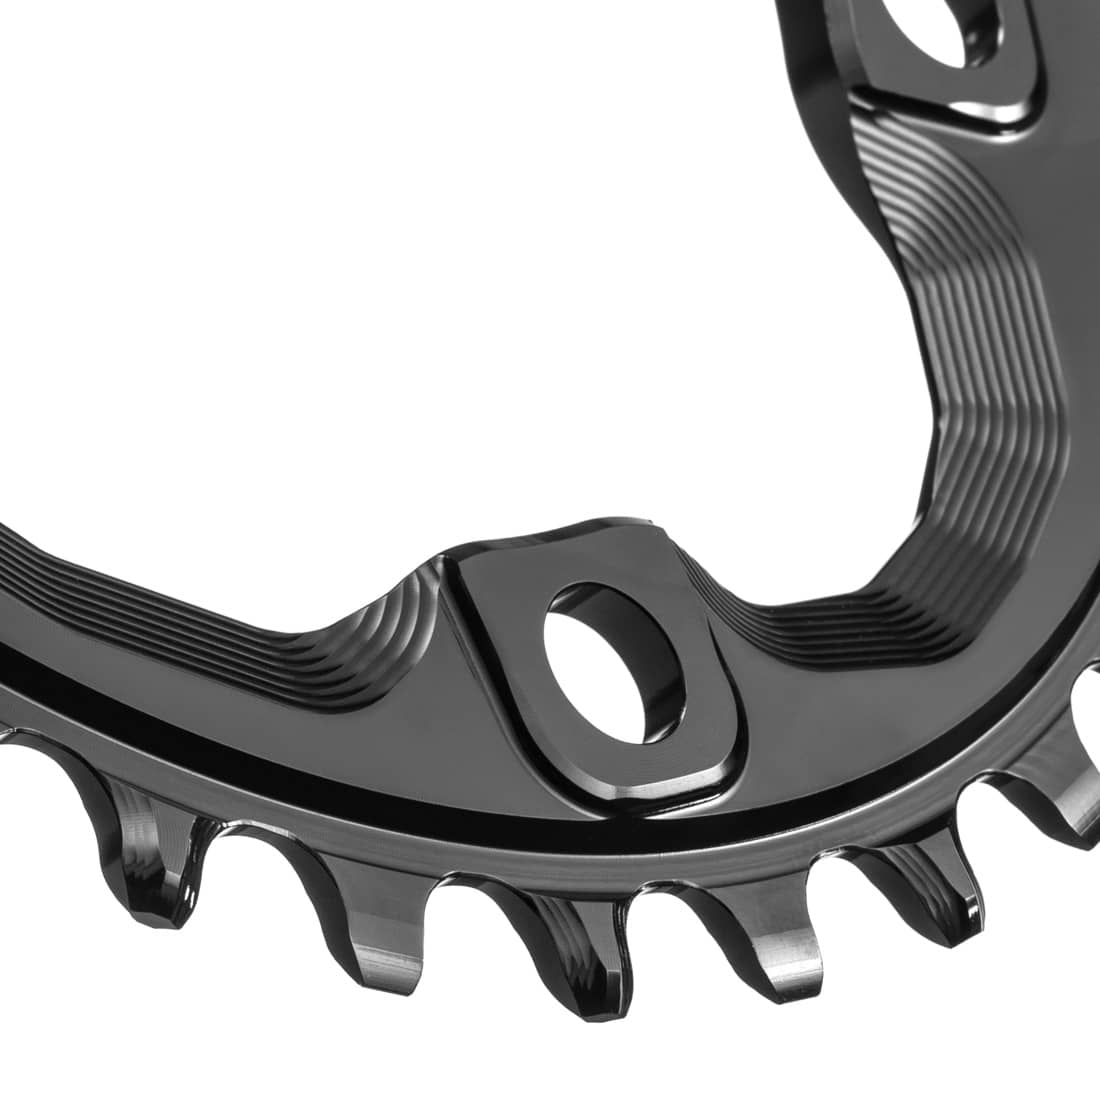 OVAL traction chainring for shimano XT M8000 / SLX M7000 for Shimano HG+ 12spd chain